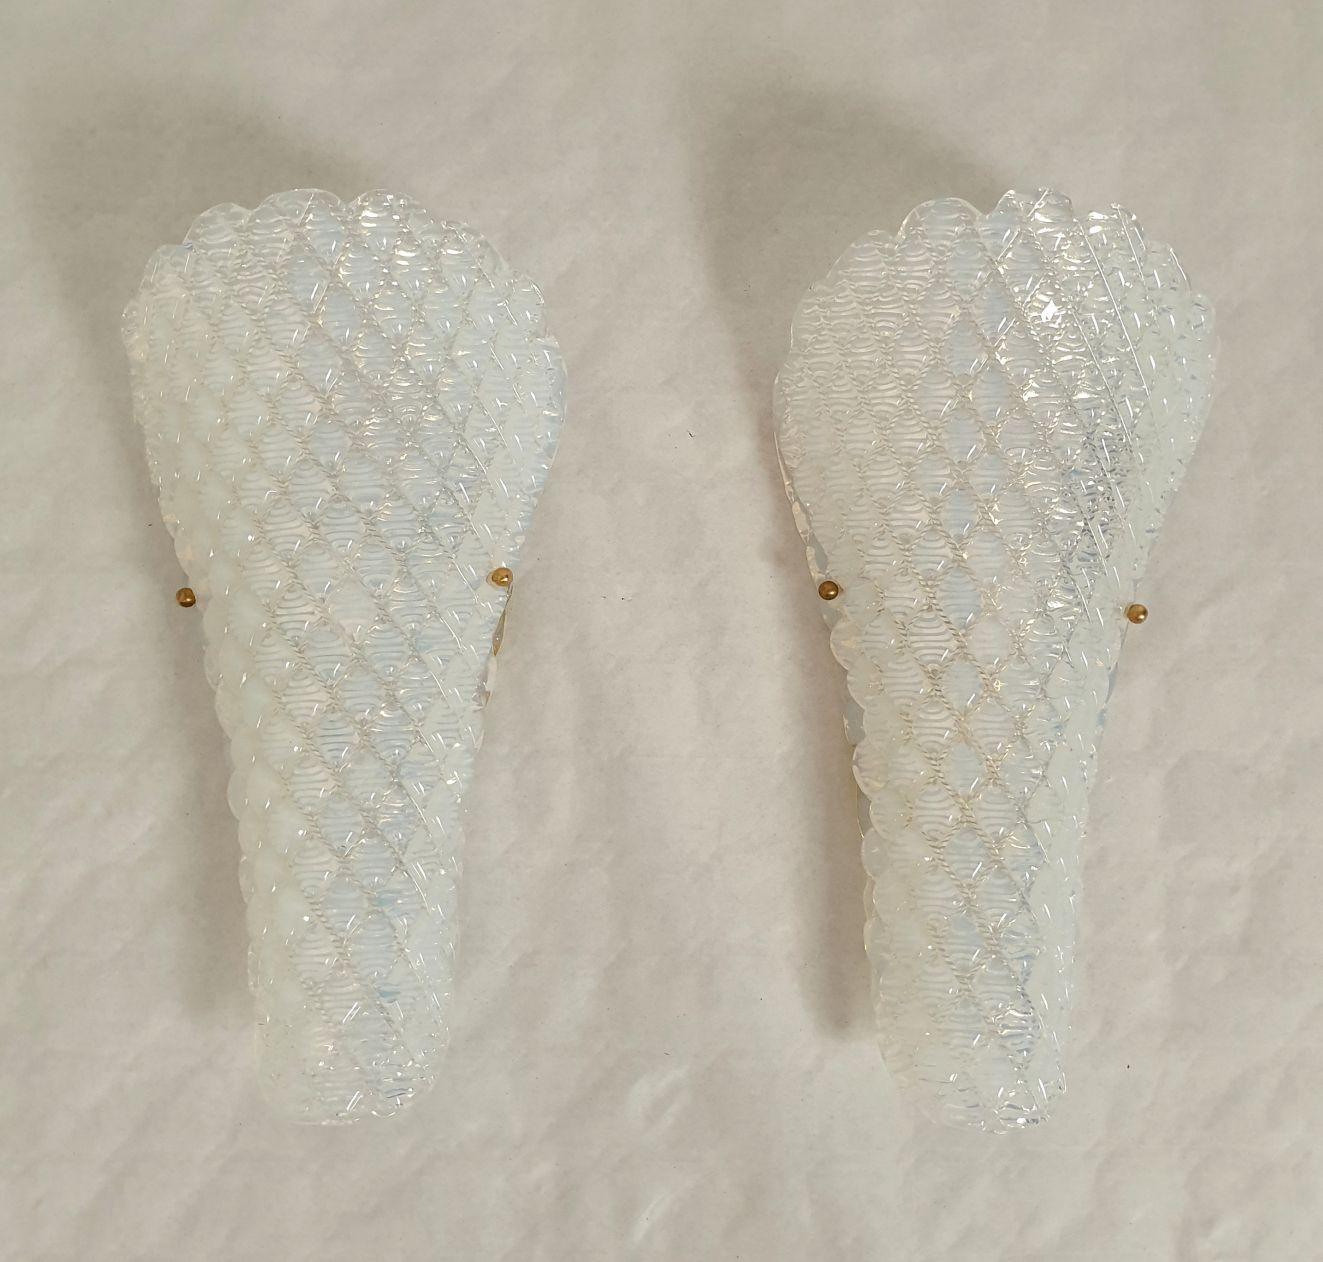 Pair of opaline Murano glass sconces, Mid Century Modern, attributed to Mazzega, Italy 1970s.
Set of three pairs, or six sconces available. Sold and priced by pair.
The Italian sconces are made of a single thick piece of Murano glass, curved, with a